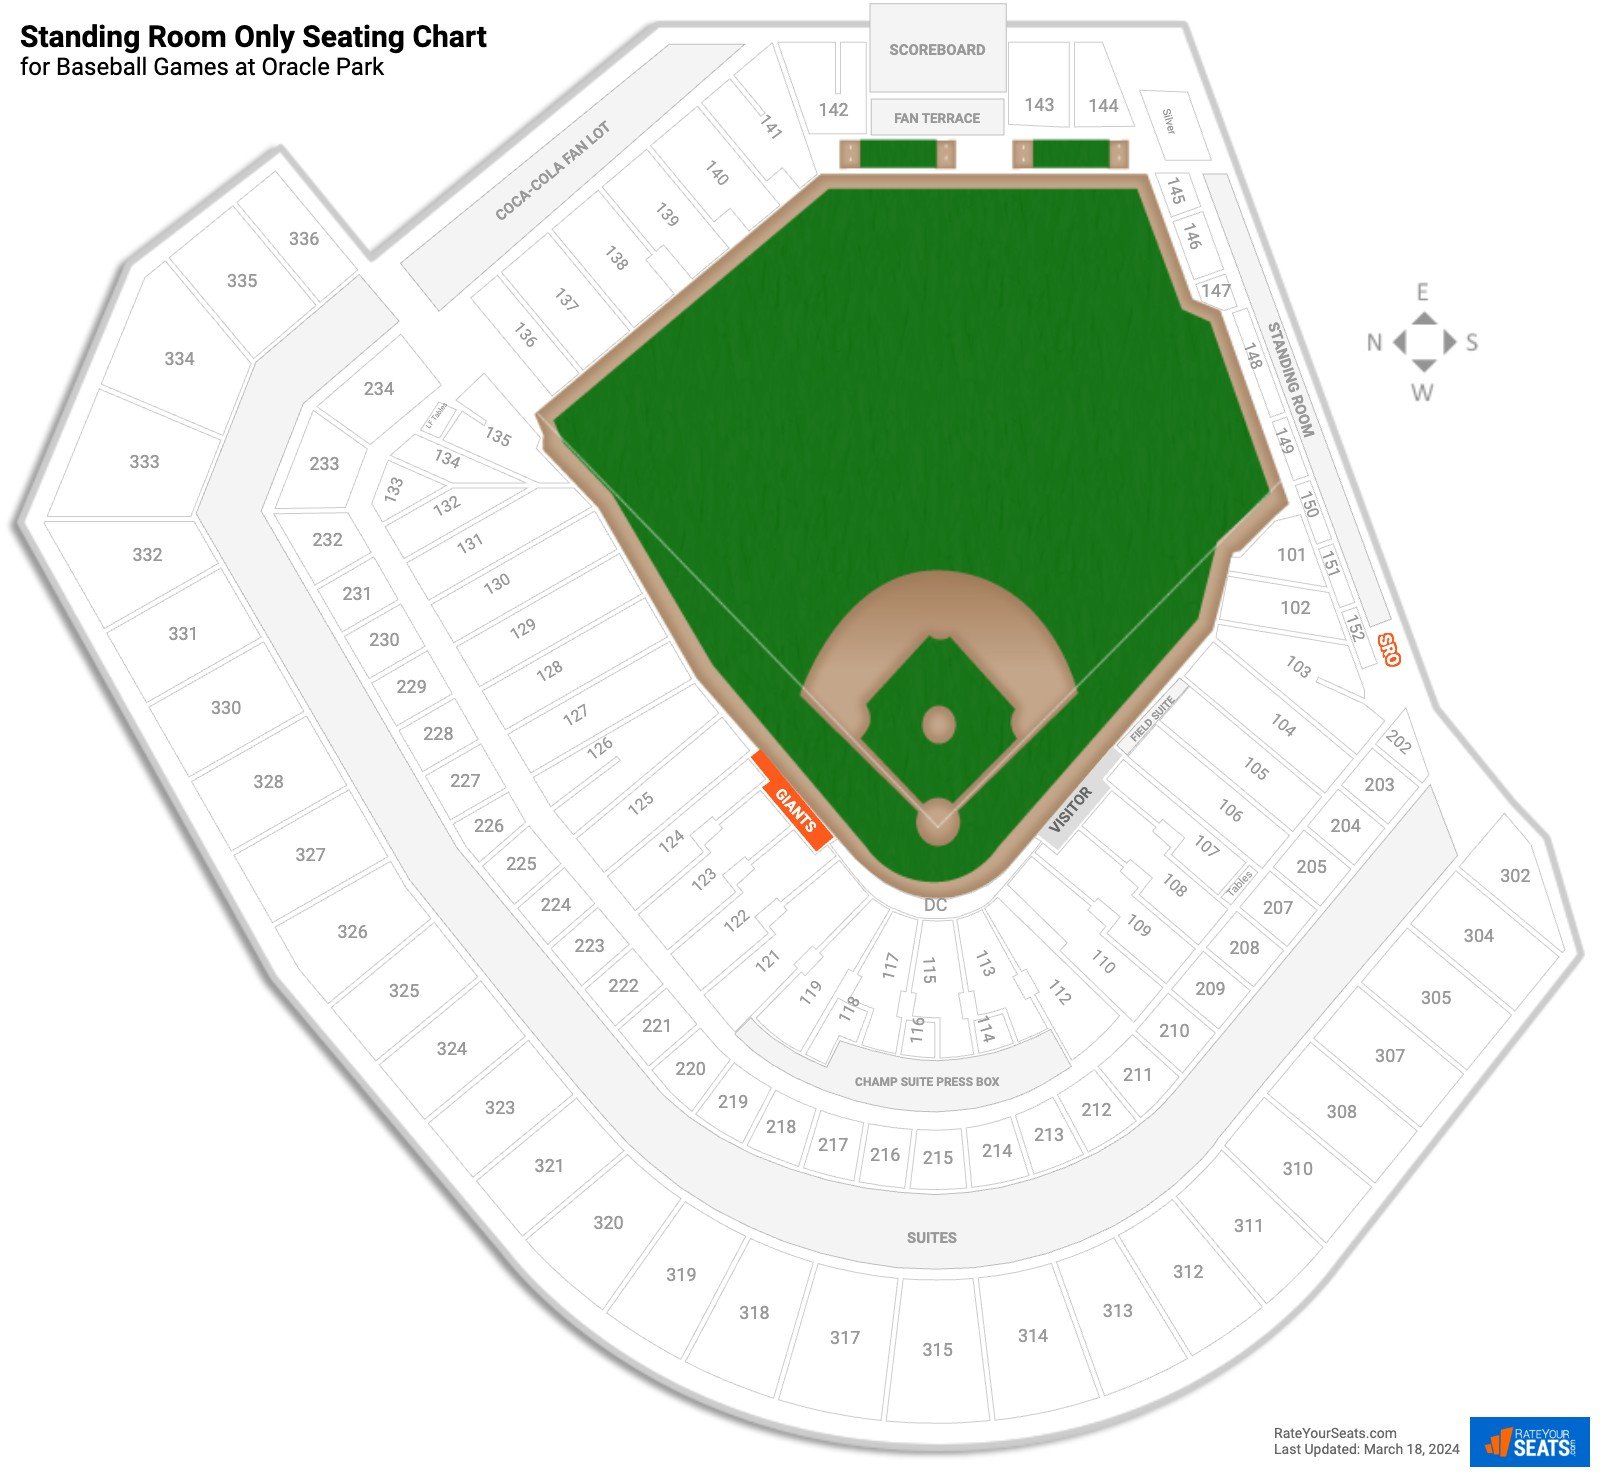 Baseball Standing Room Only Seating Chart at Oracle Park